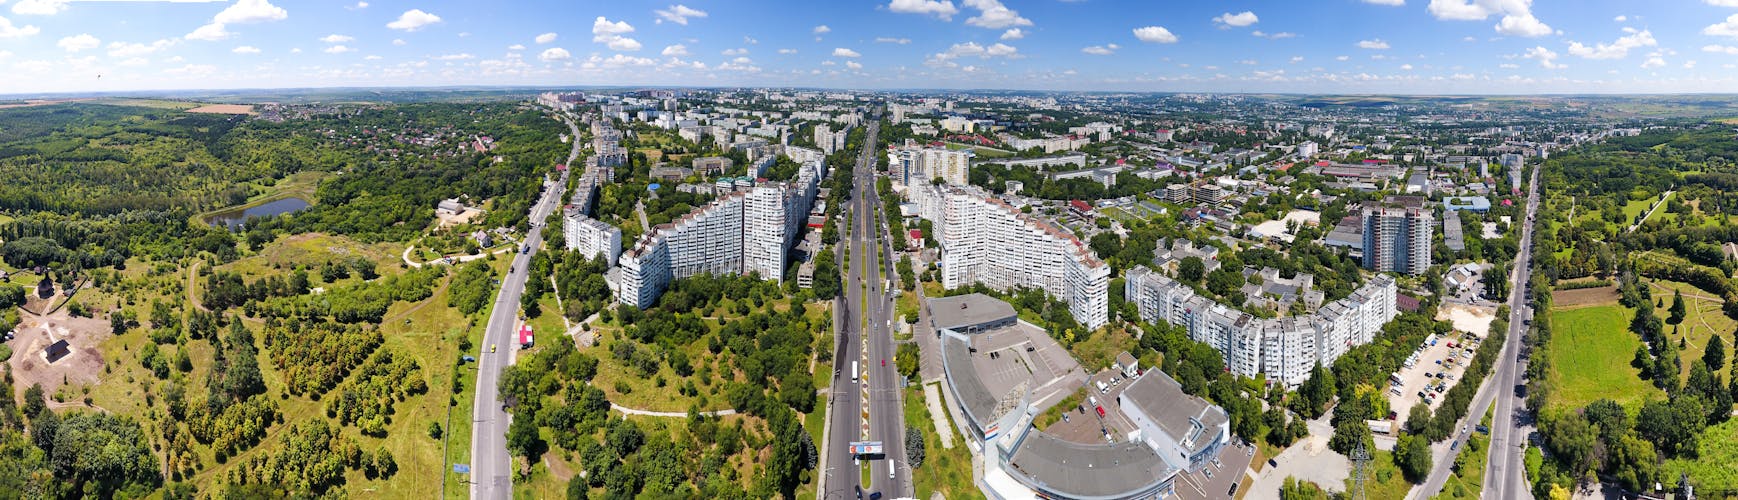 Panoramic view of Chisinau, the capital city of the Republic of Moldova.